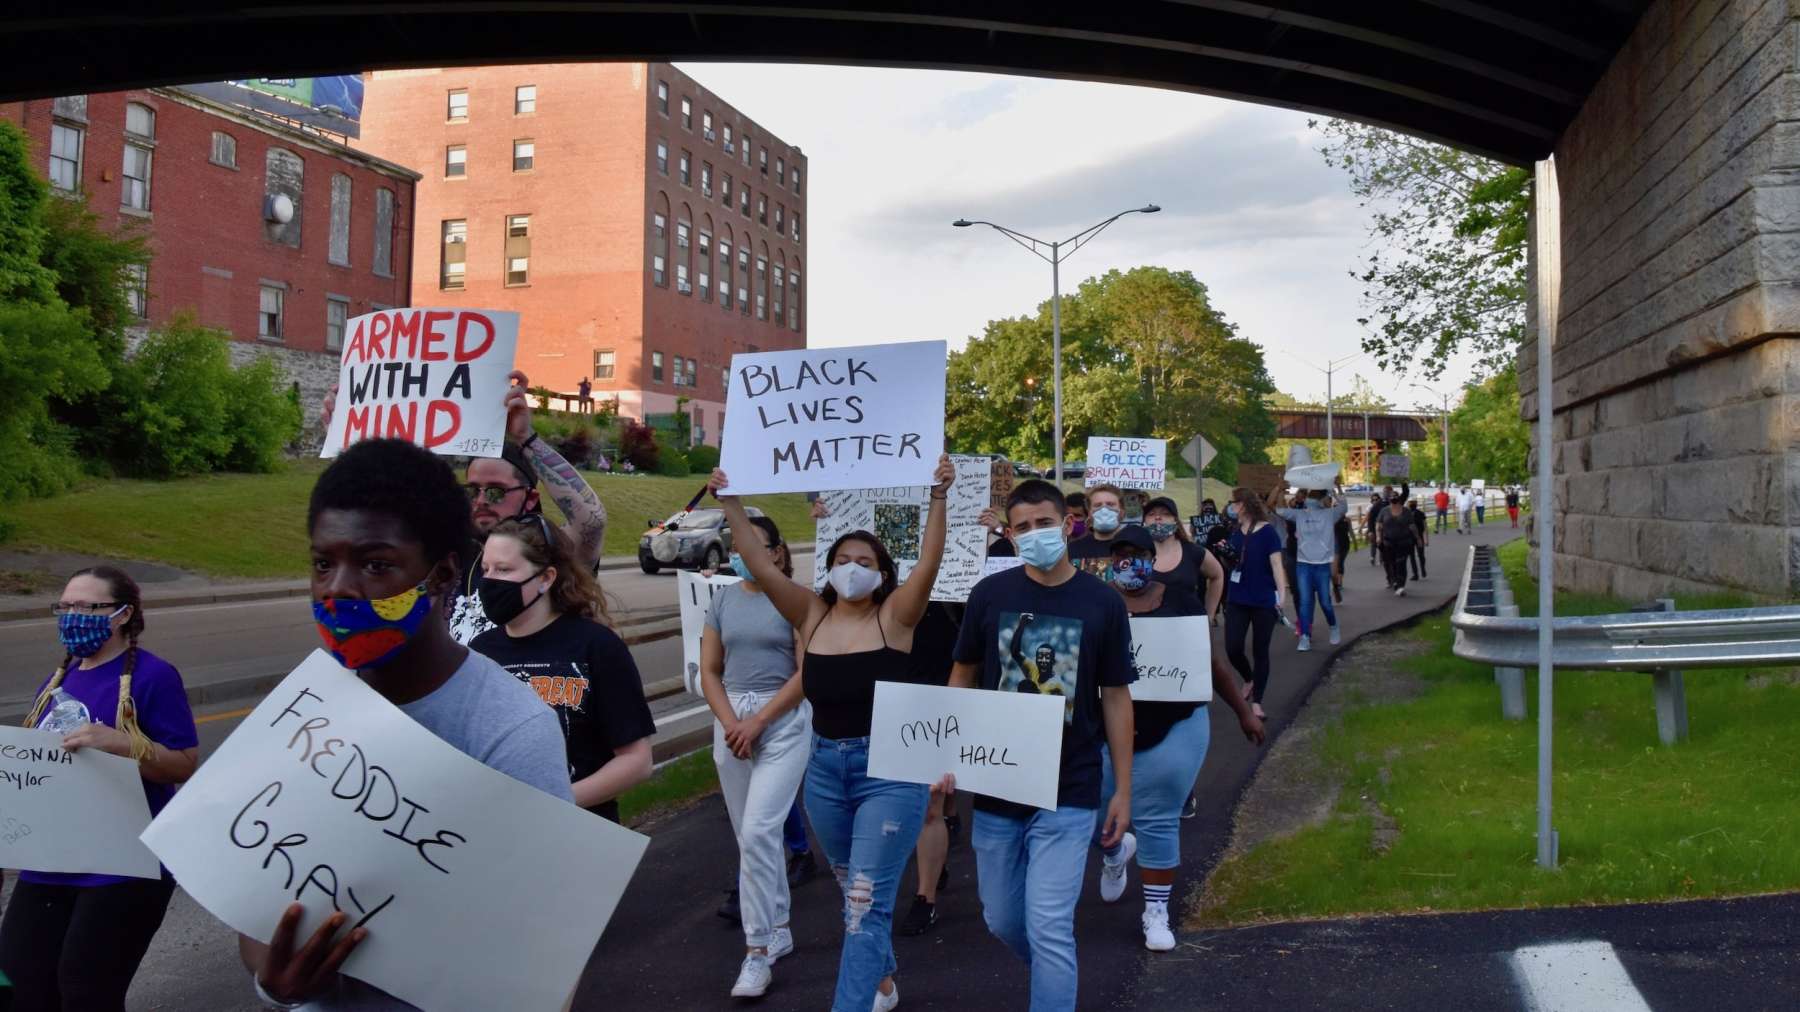 Rhode Island News: Over a hundred march against police brutality in Woonsocket